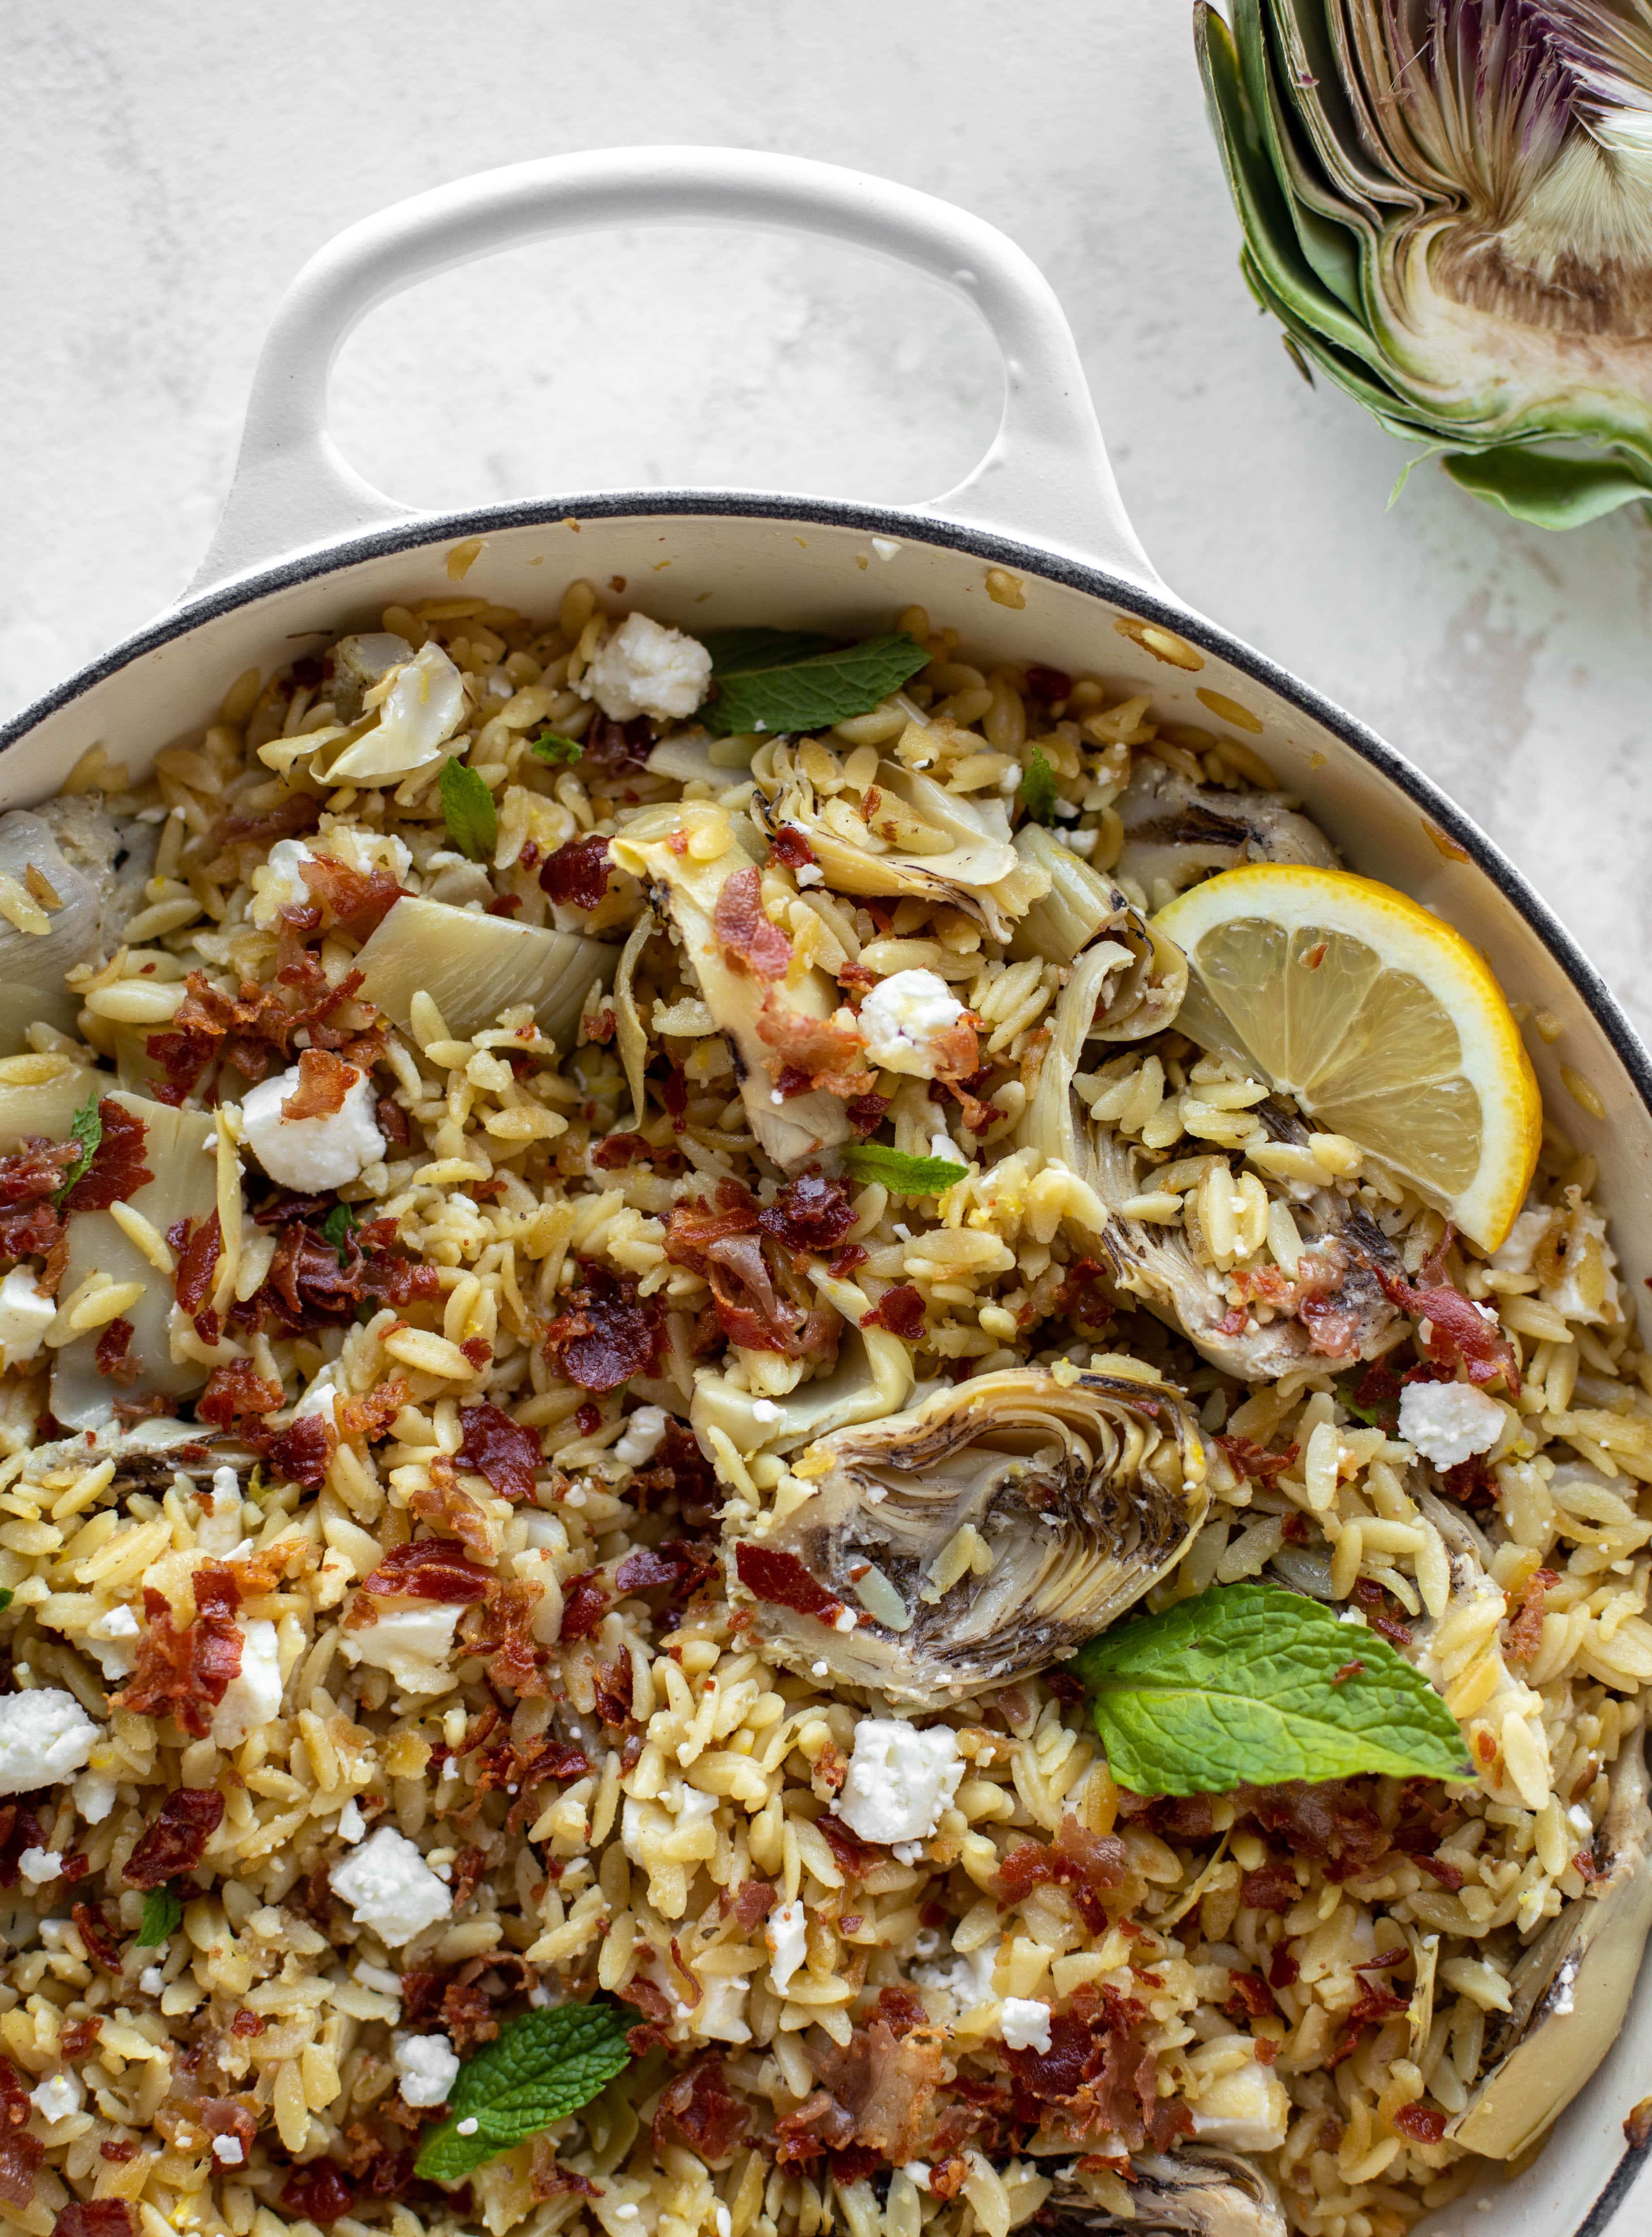 This crispy orzo is a wonderful spring dish. Artichoke hearts, lemon, goat cheese and herbs all topped with a sprinkling of crunchy prosciutto. 